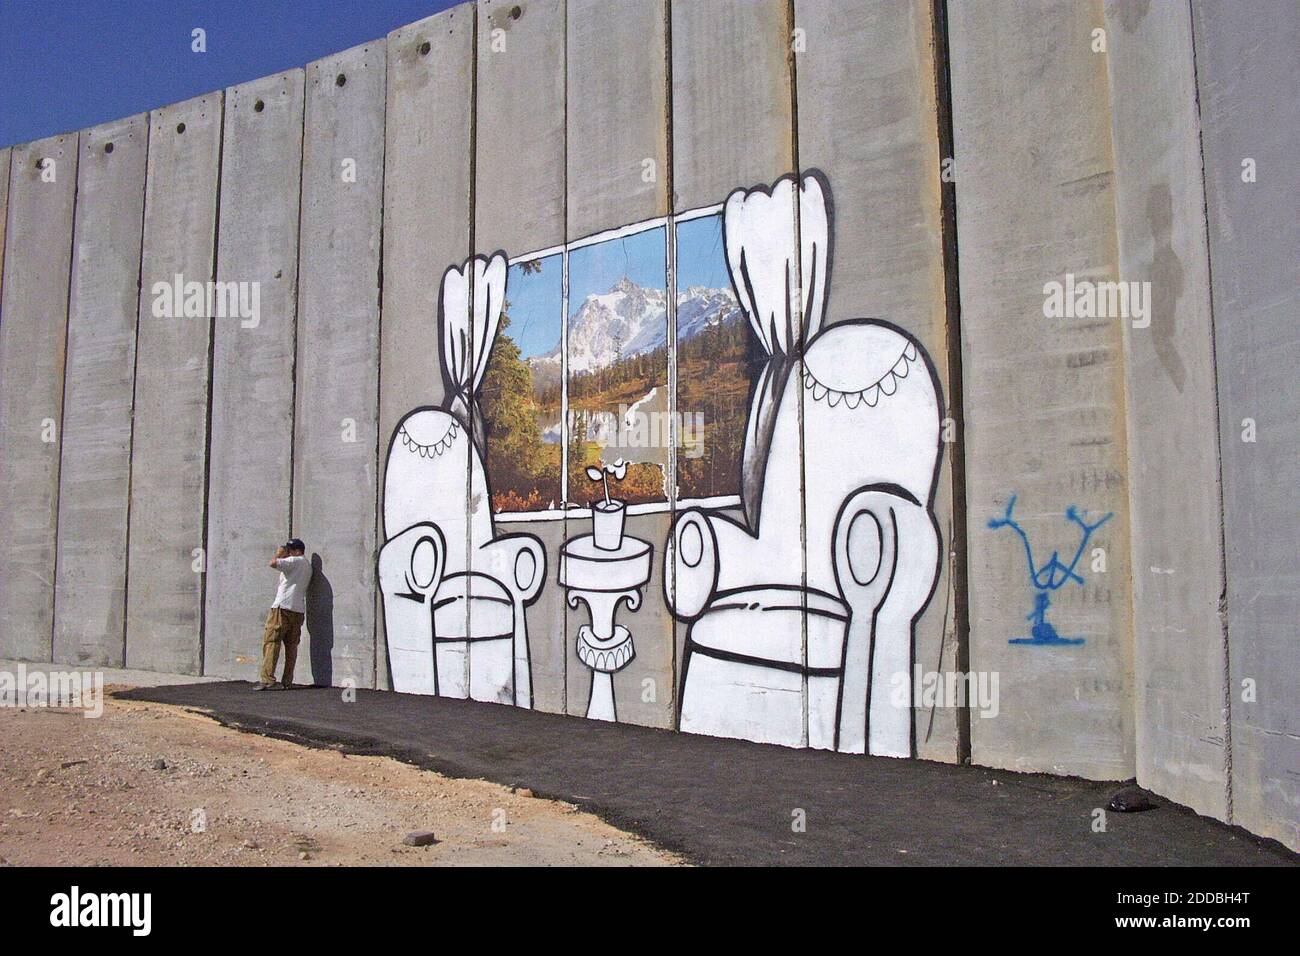 NO FILM, NO VIDEO, NO TV, NO DOCUMENTARY - This section of the Israeli security wall separates Bethlehem and Jerusalem pictured on August 17, 2005. Local and foreign artists have painted protests and art work on some panels of the wall. Photo by Martin Merzer/Miami Herald/KRT/ABACAPRESS.COM Stock Photo